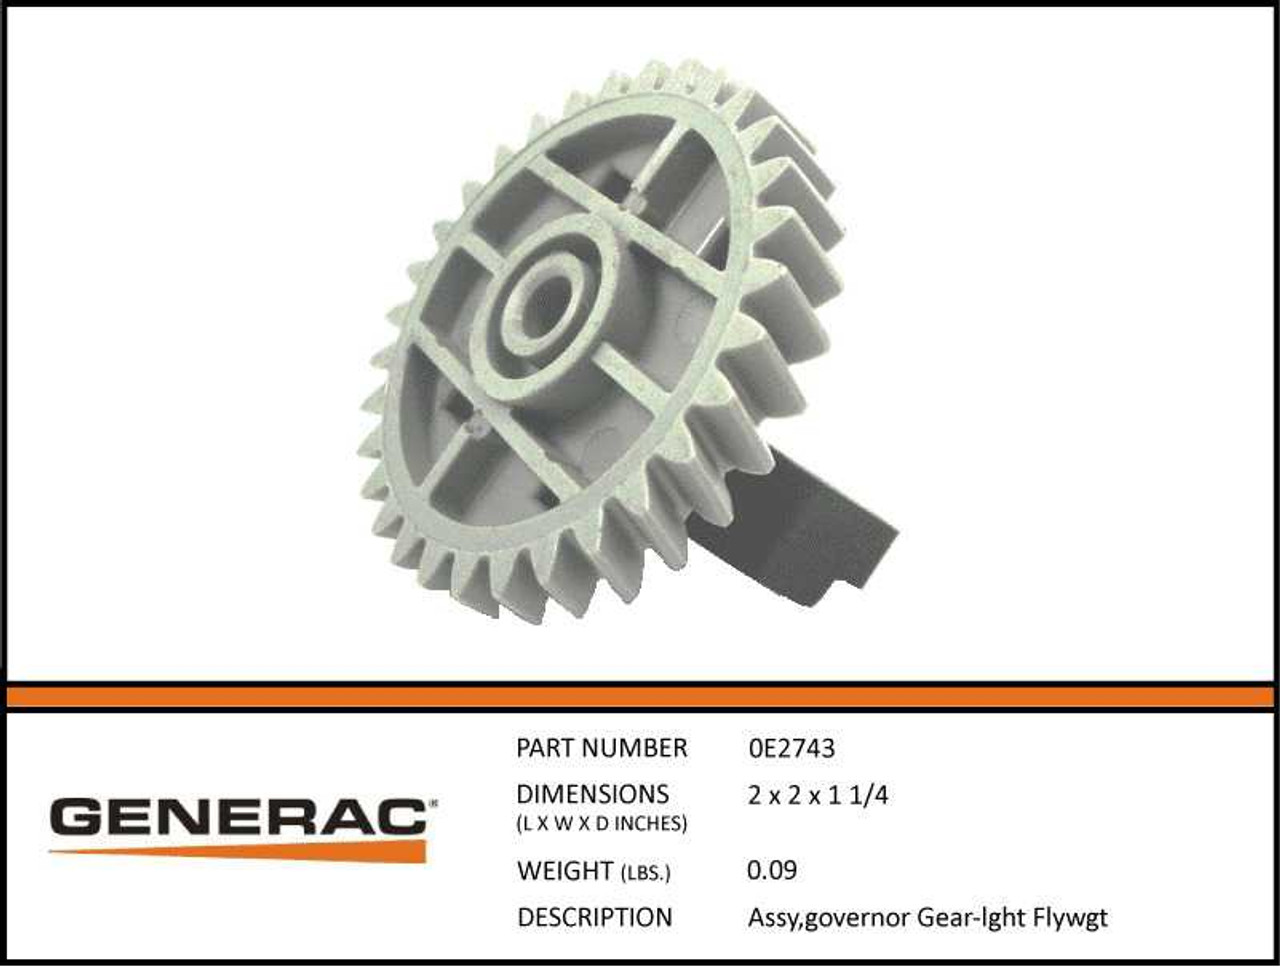 Generac 0E2743 Governor Gear Assembly Generator Part